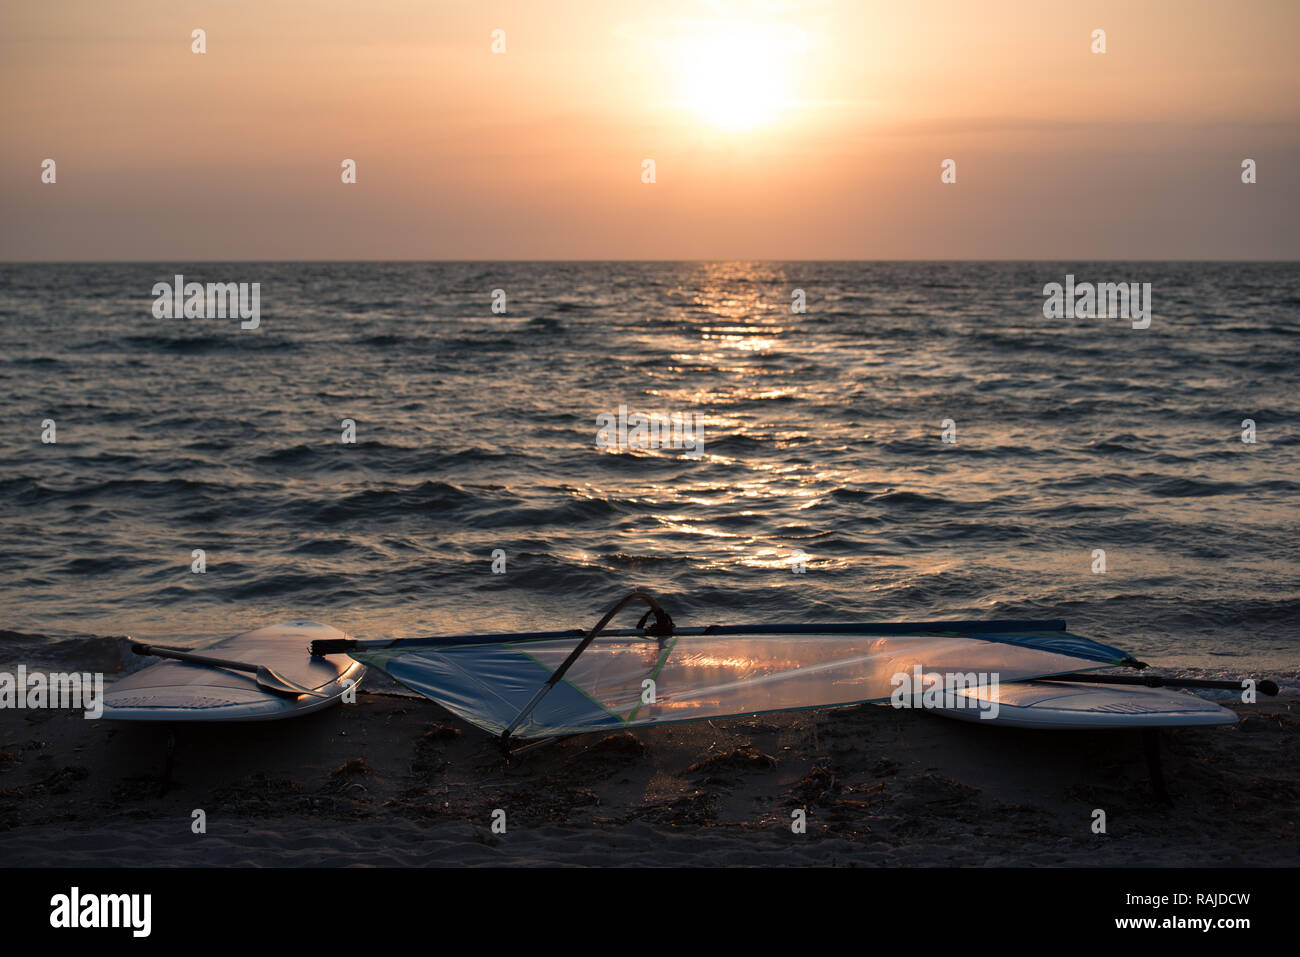 Landscape of sandy beach with windsurfing boards lying on background of sea in sunset light. Stock Photo